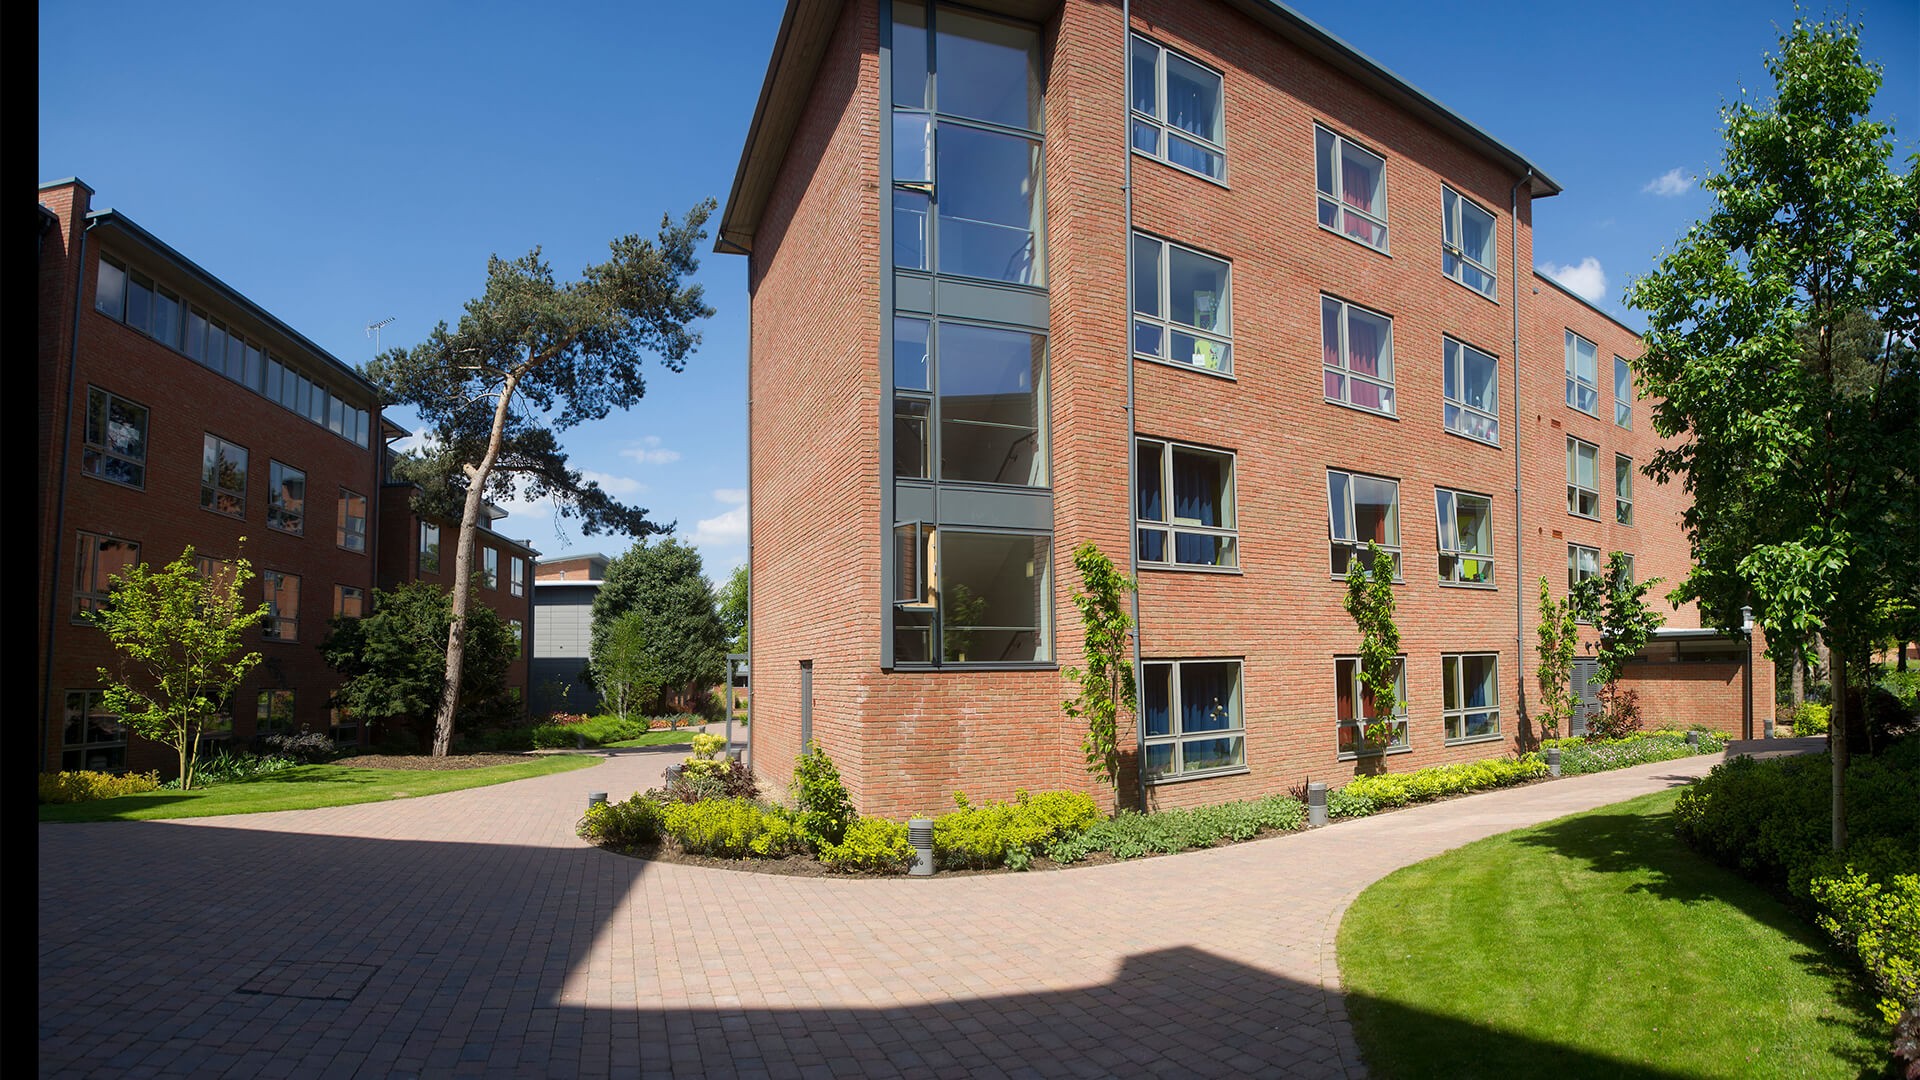 An image of the outside of some of the accomodation blocks on the Edge Hill University campus.